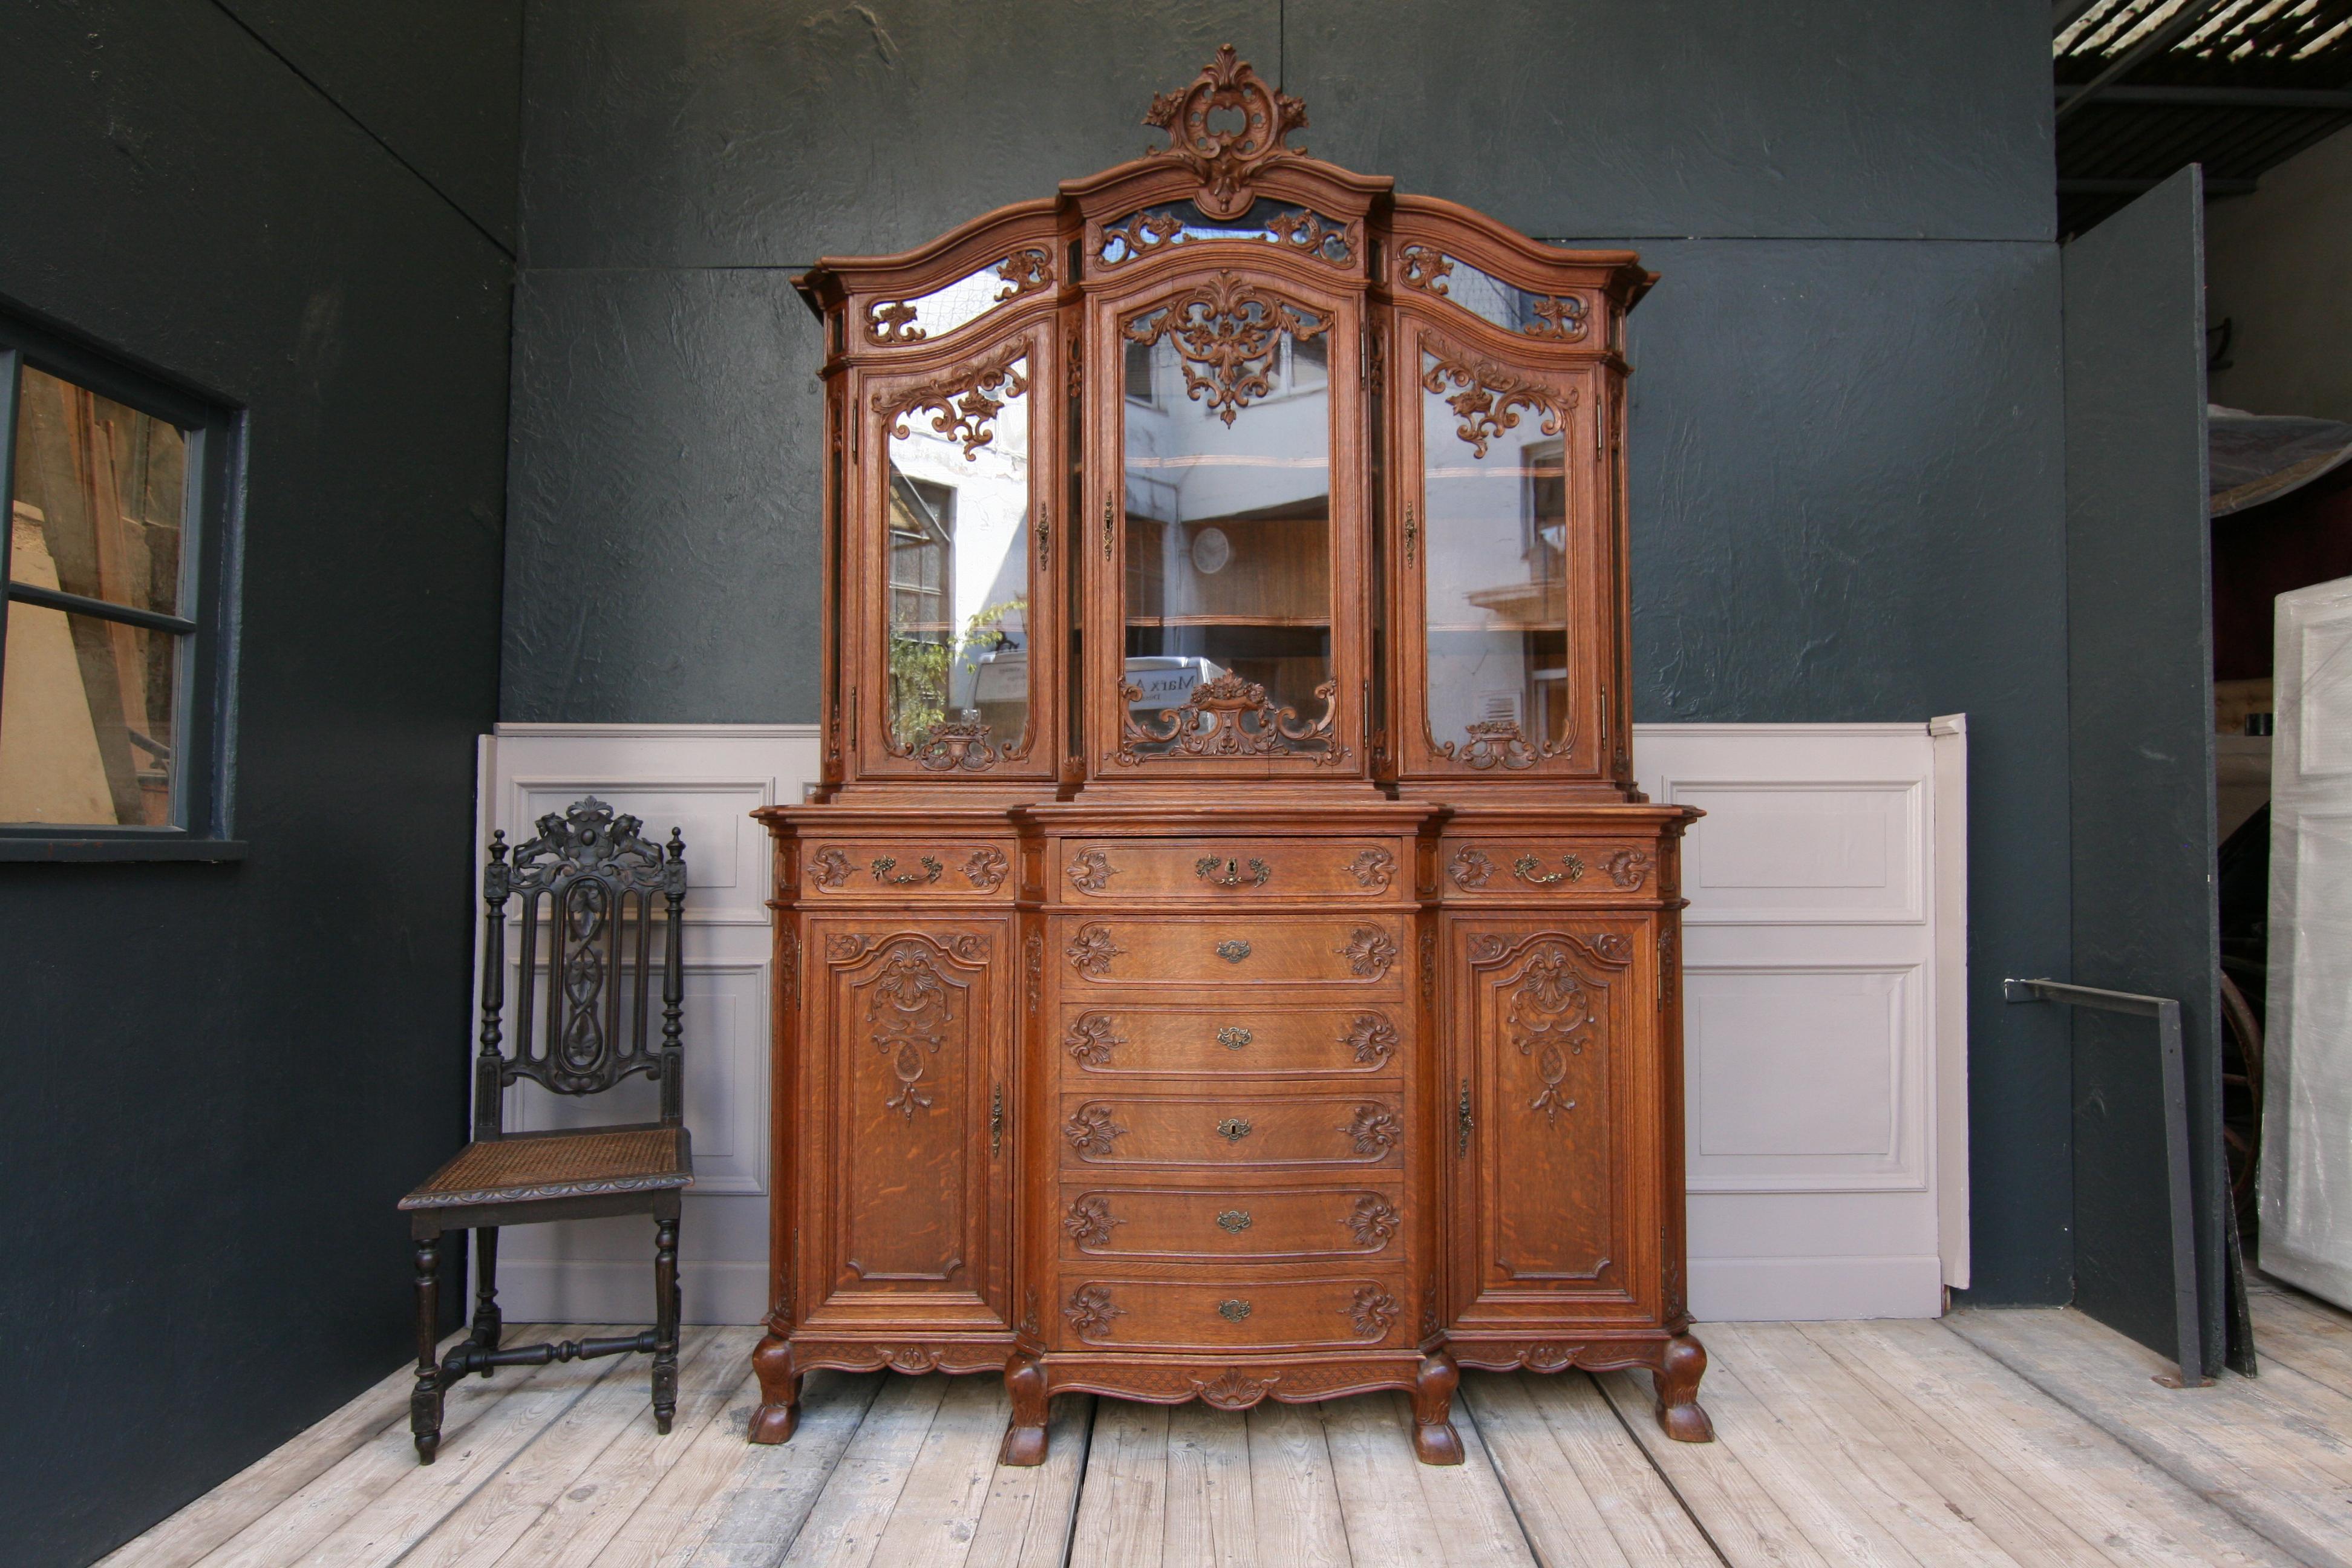 Original Liègeois buffet from circa 1910. Solid oak and richly decorated with the tendrils and rocaille carvings typical of the time and place.
The city of Liège in Belgium, where this piece comes from, was especially famous since the 18th century